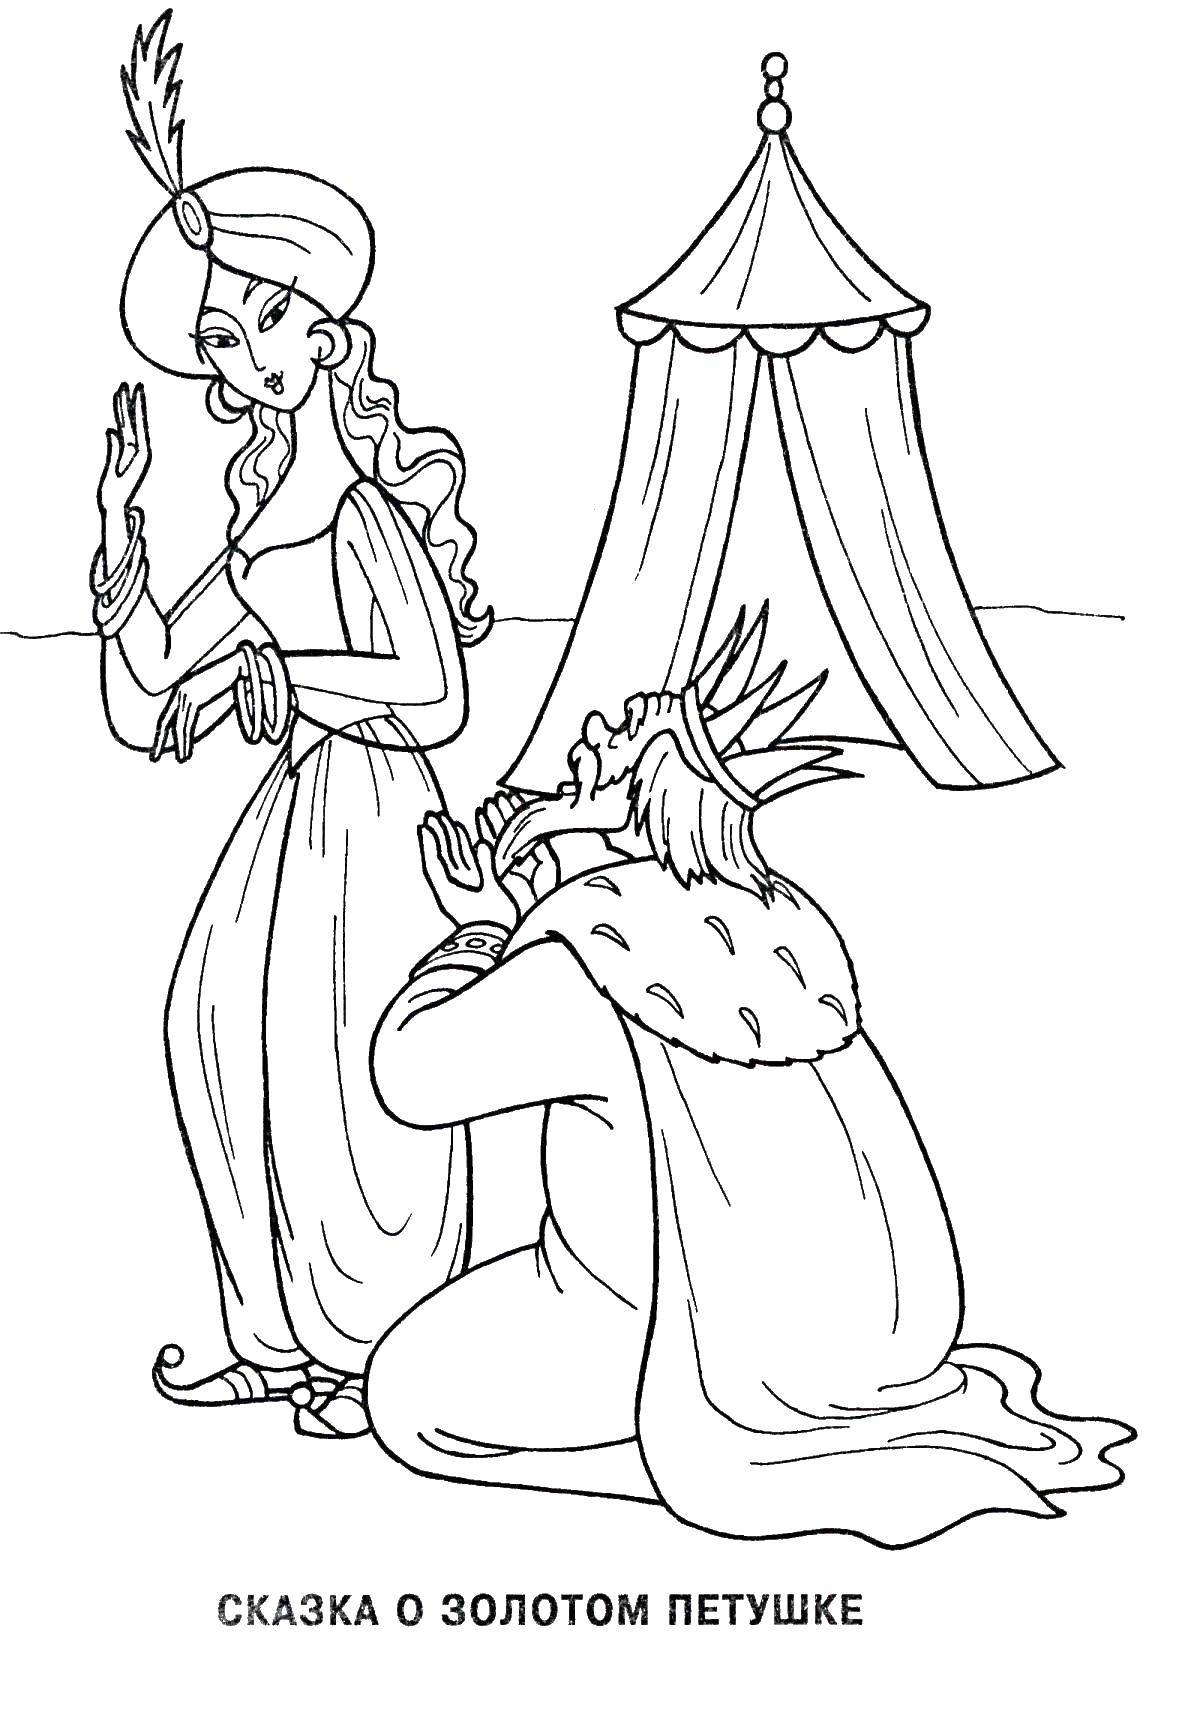 Coloring Shamahanskaya Queen and king. Category Fairy tales. Tags:  the Golden Cockerel, king.